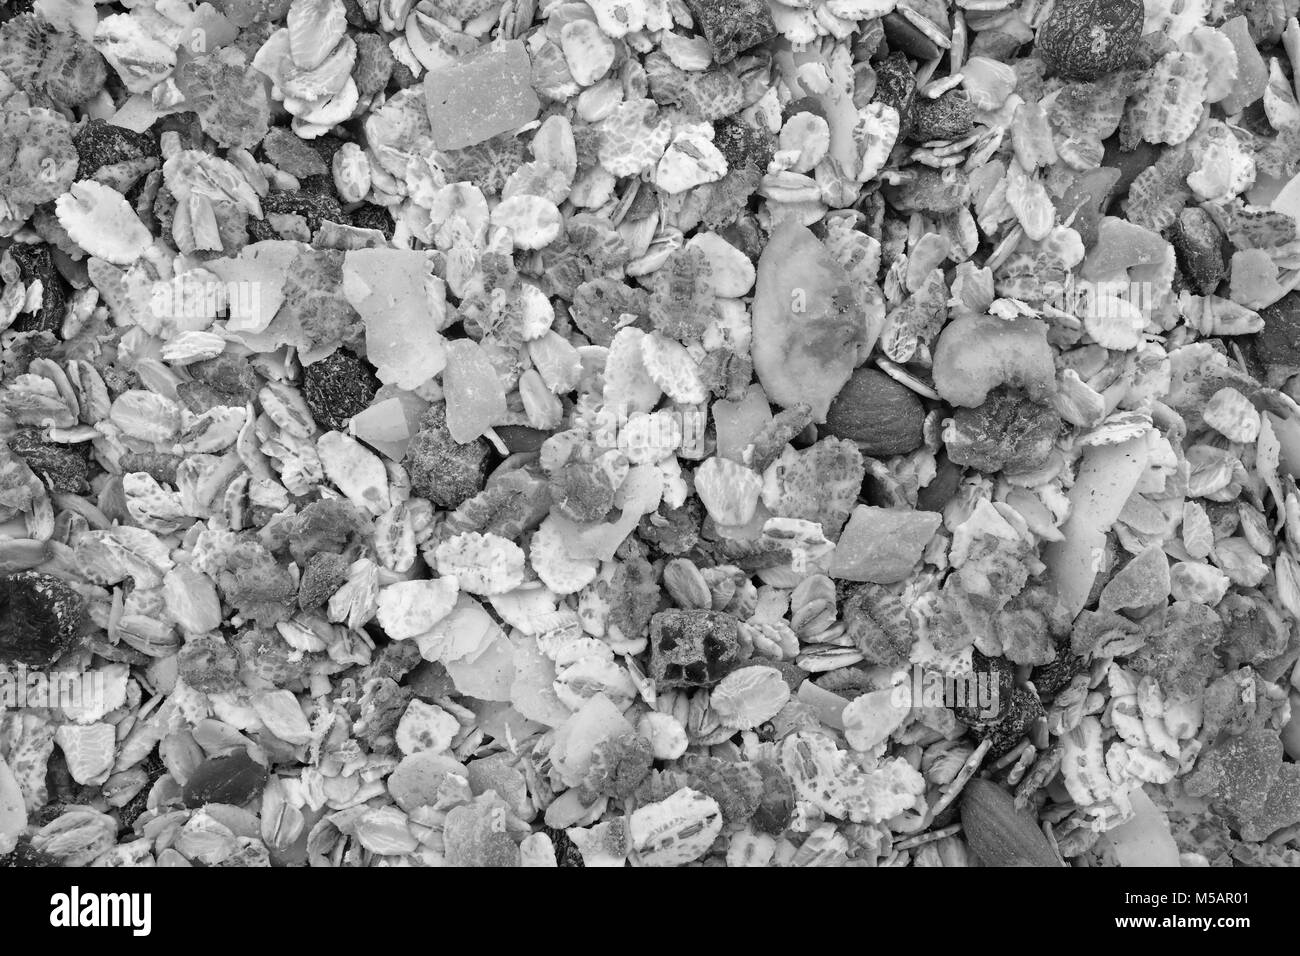 Background of muesli - cereal flakes with seeds, mixed fruit and nuts - as an abstract background texture - close detail - monochrome processing Stock Photo